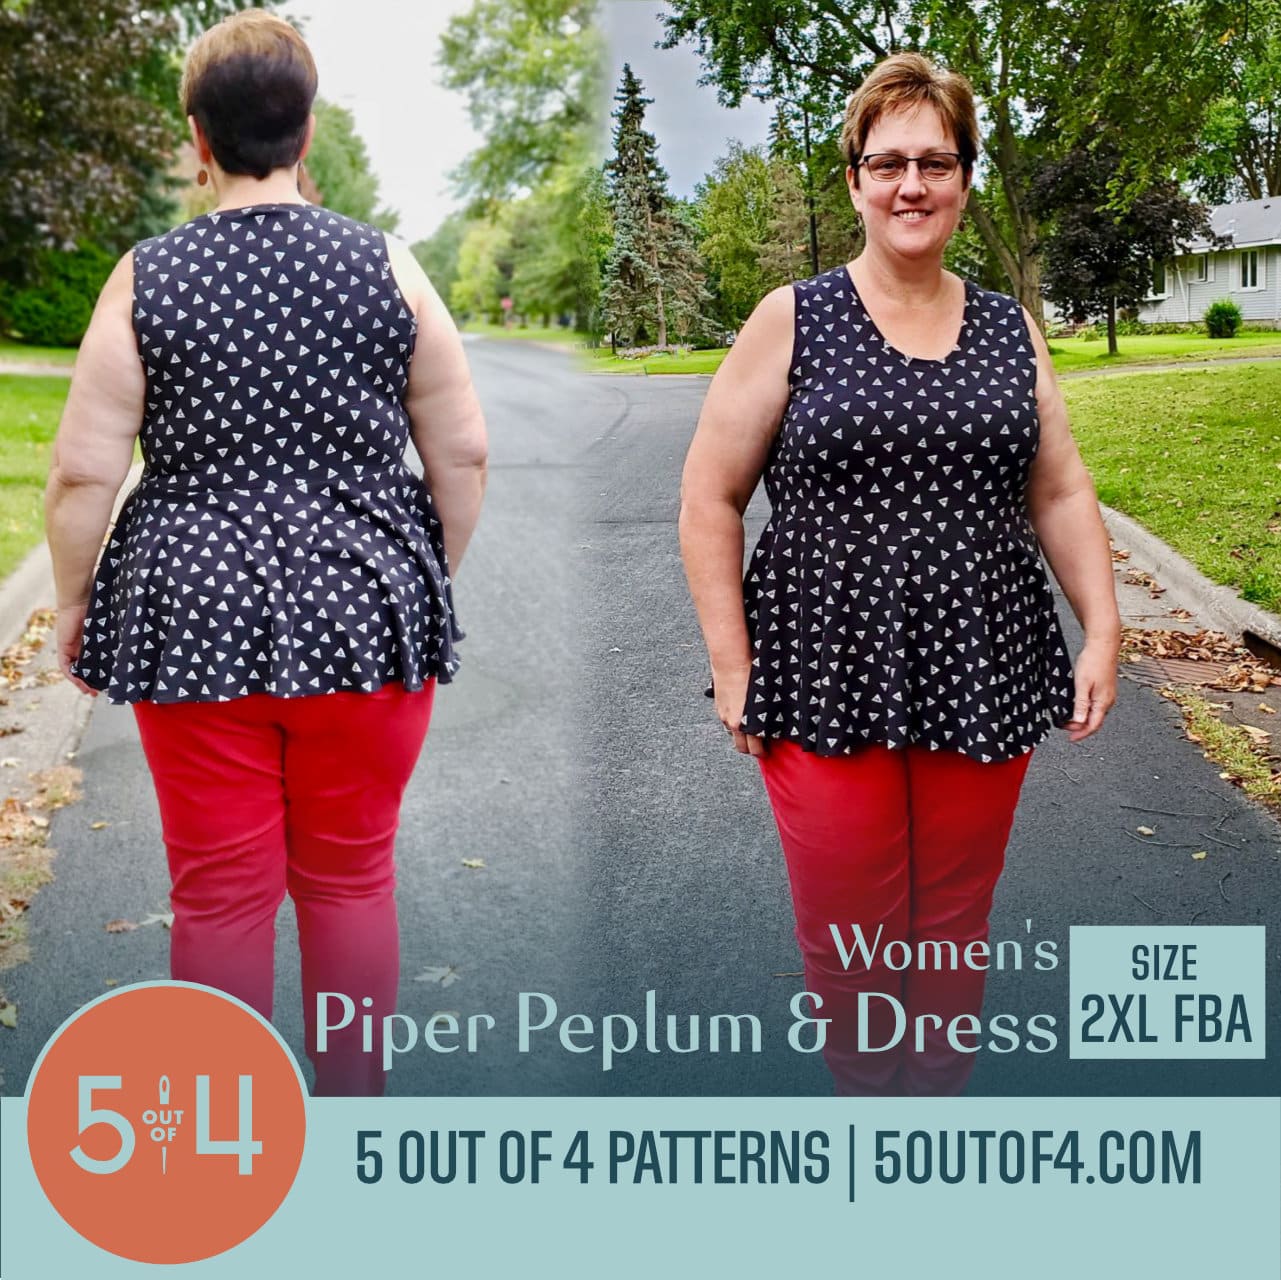 Piper Peplum and Dress - 5 out of 4 Patterns